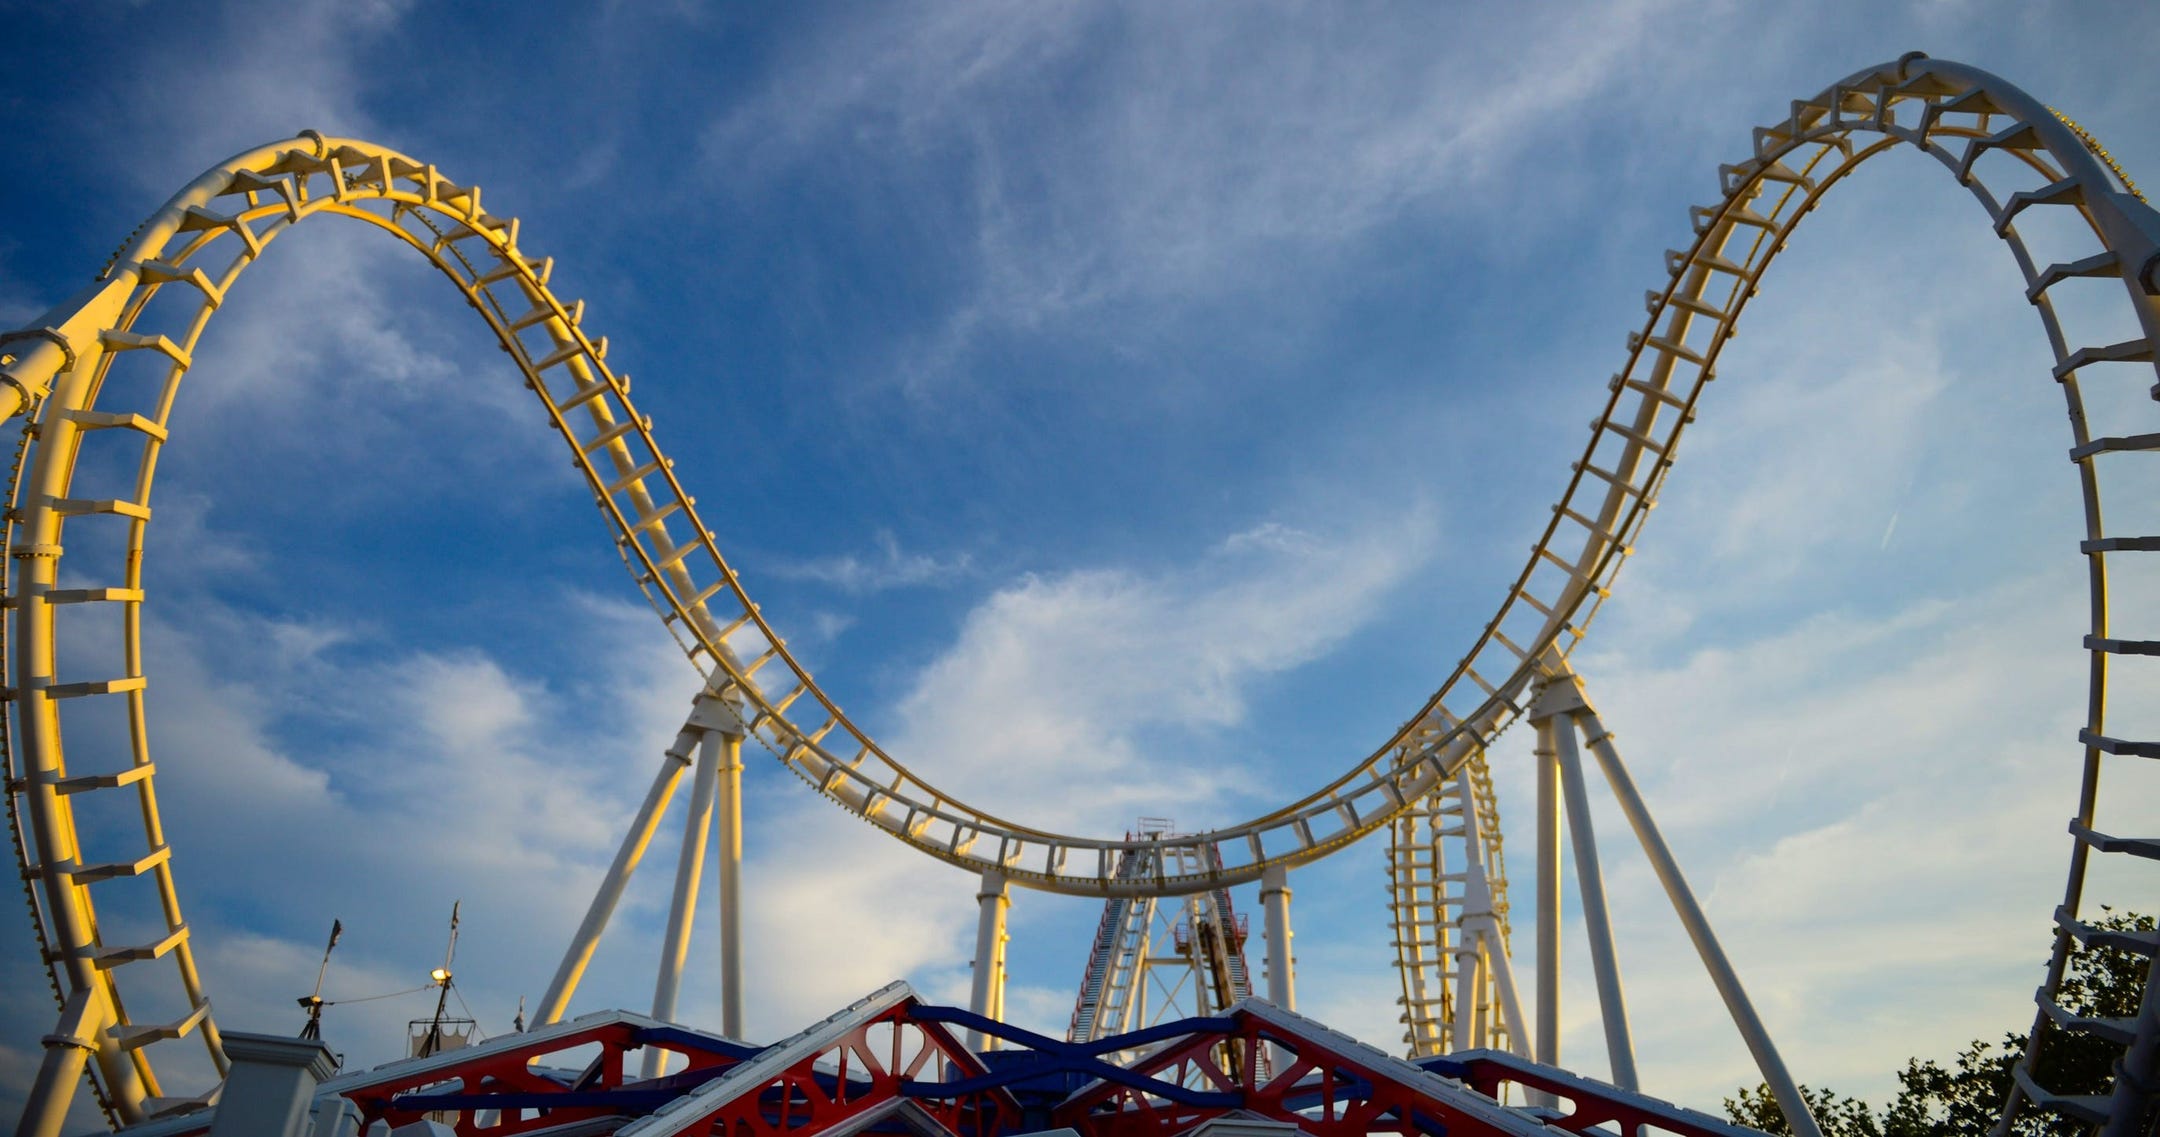 Maryland amusement parks: Jolly Roger, Funland, Trimper's and more